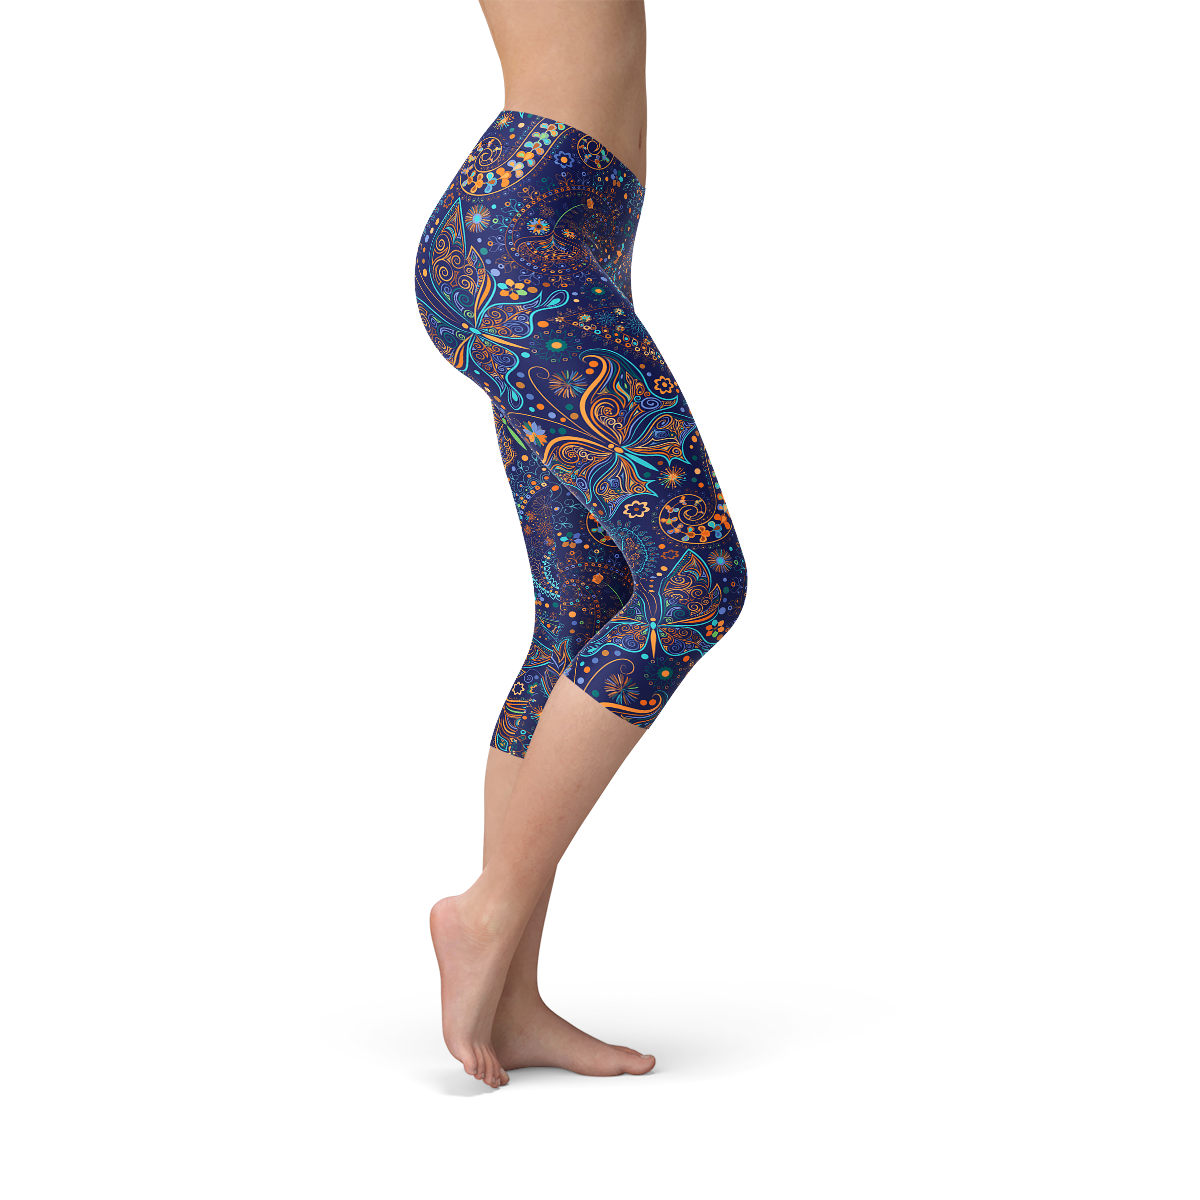 Explore our collection of comfortable capri leggings. Perfect for workouts and daily wear, these leggings offer style and flexibility. Shop now!